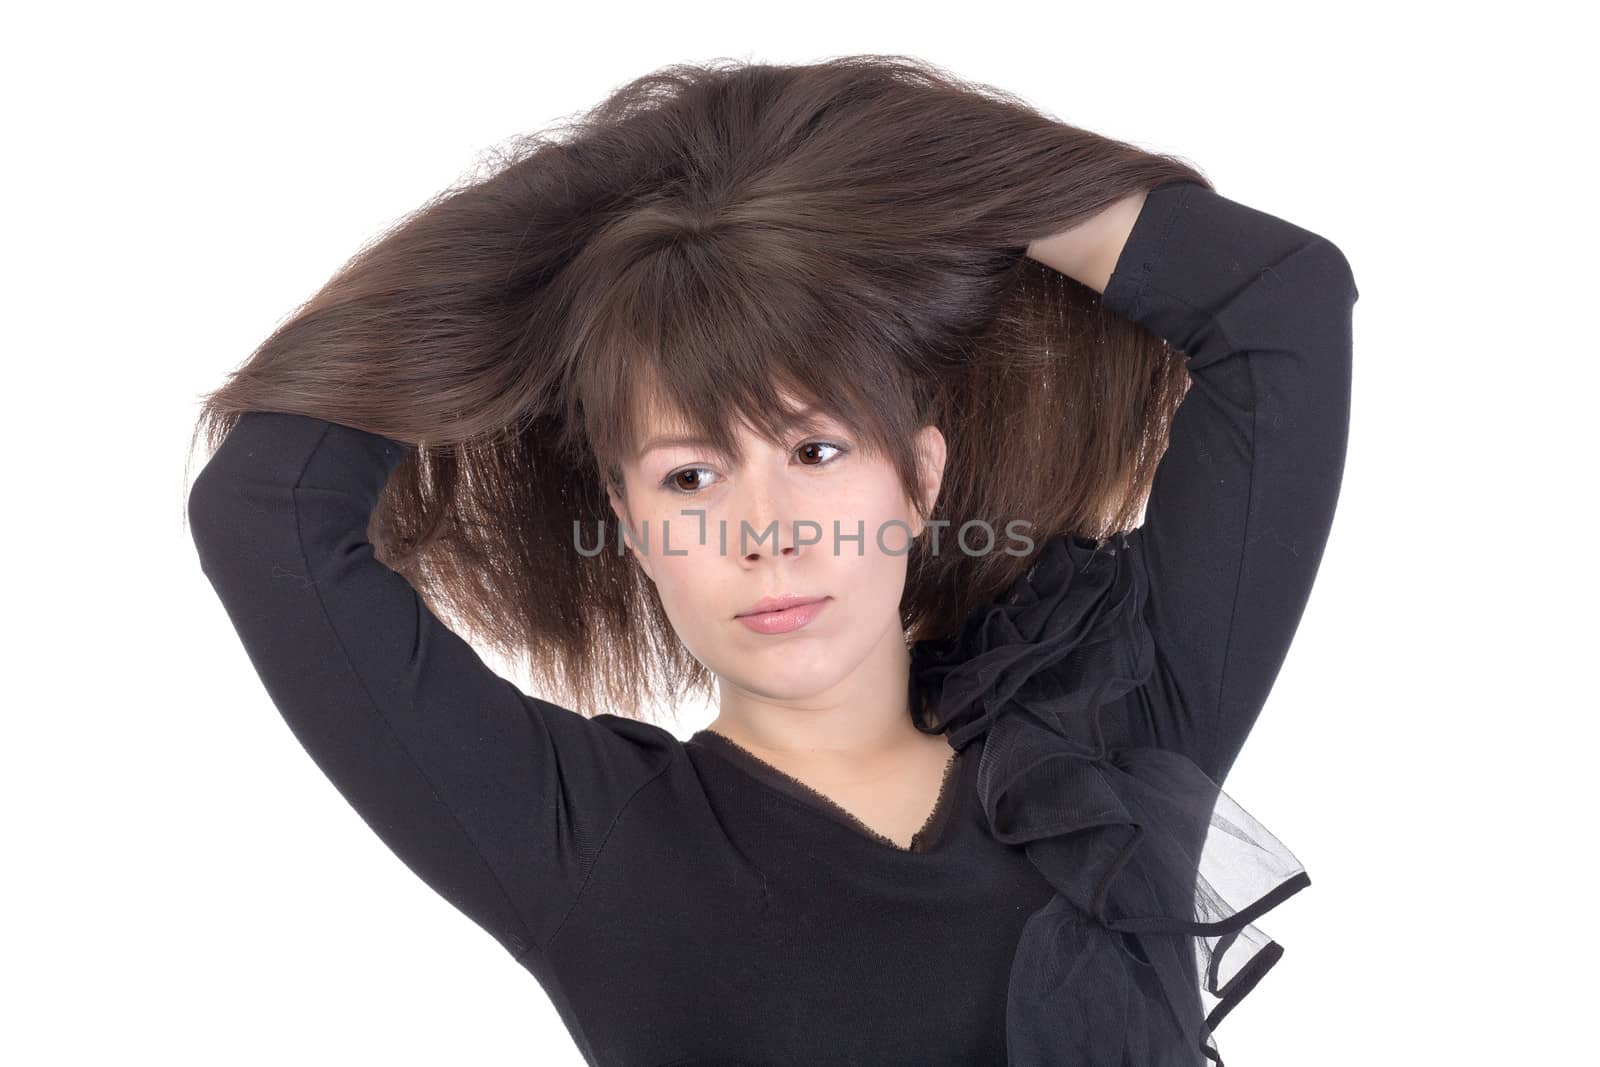 Attractive young woman with lovely long straight brunette hair running her hands through the tresses lifting them up above her head isolated on white